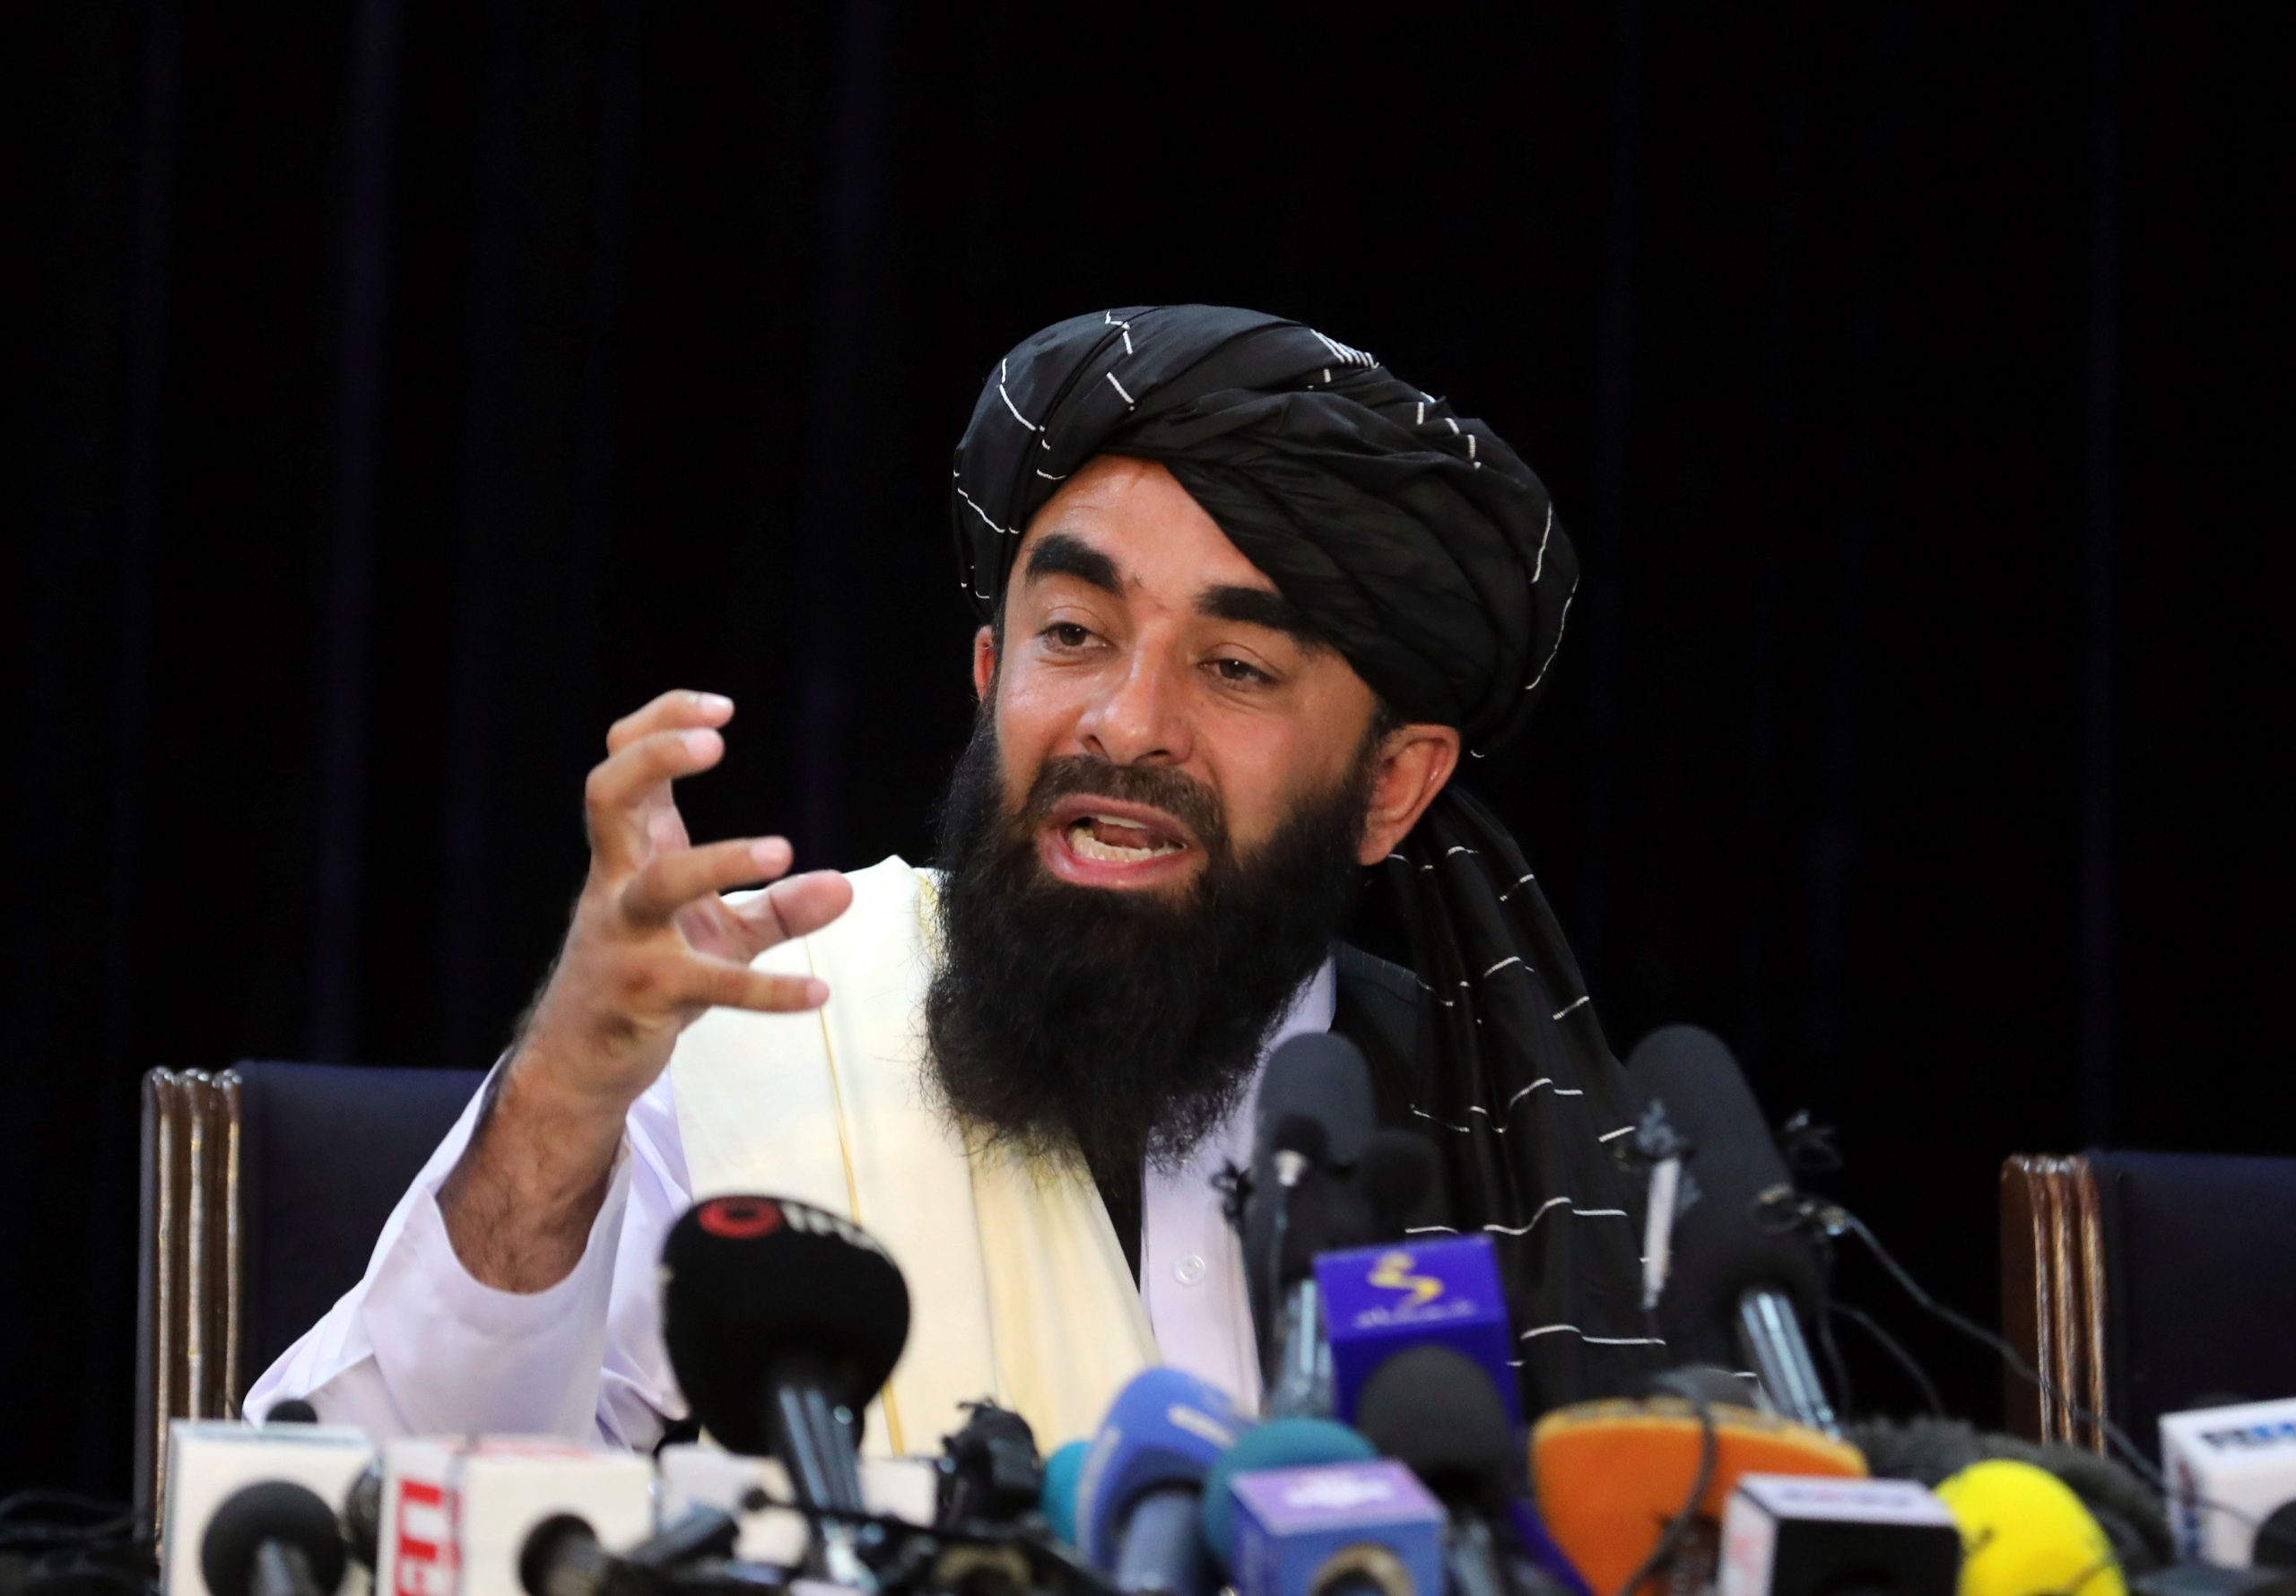 Women should give birth, they can’t be ministers: Taliban on all-male cabinet